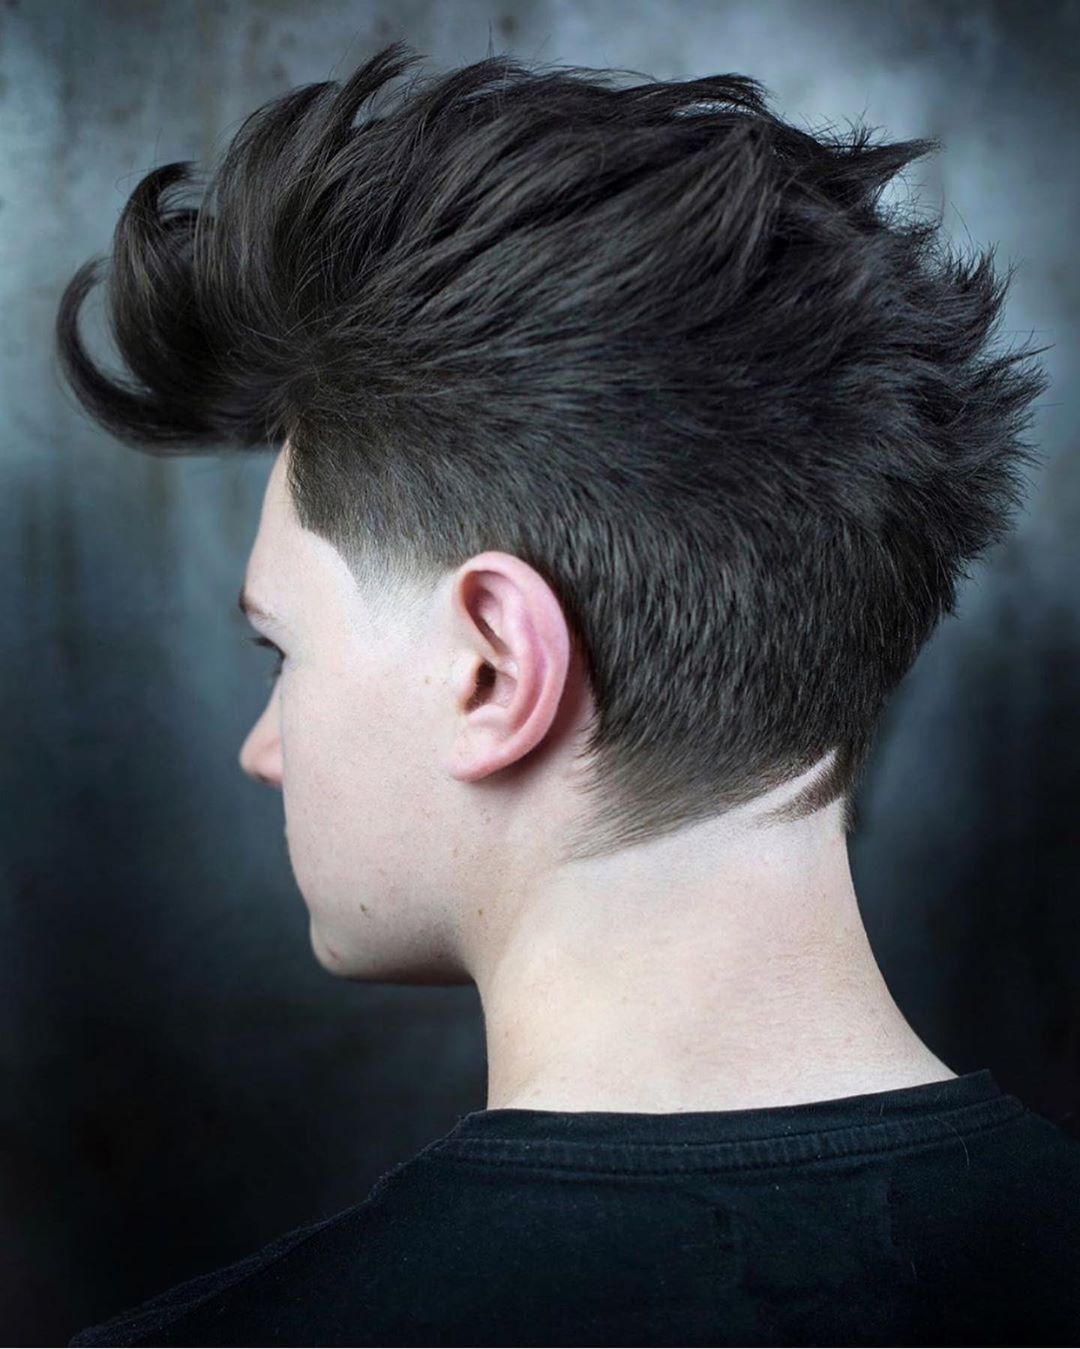 60 Best Young Men's Haircuts The latest young men's hairstyles 2020